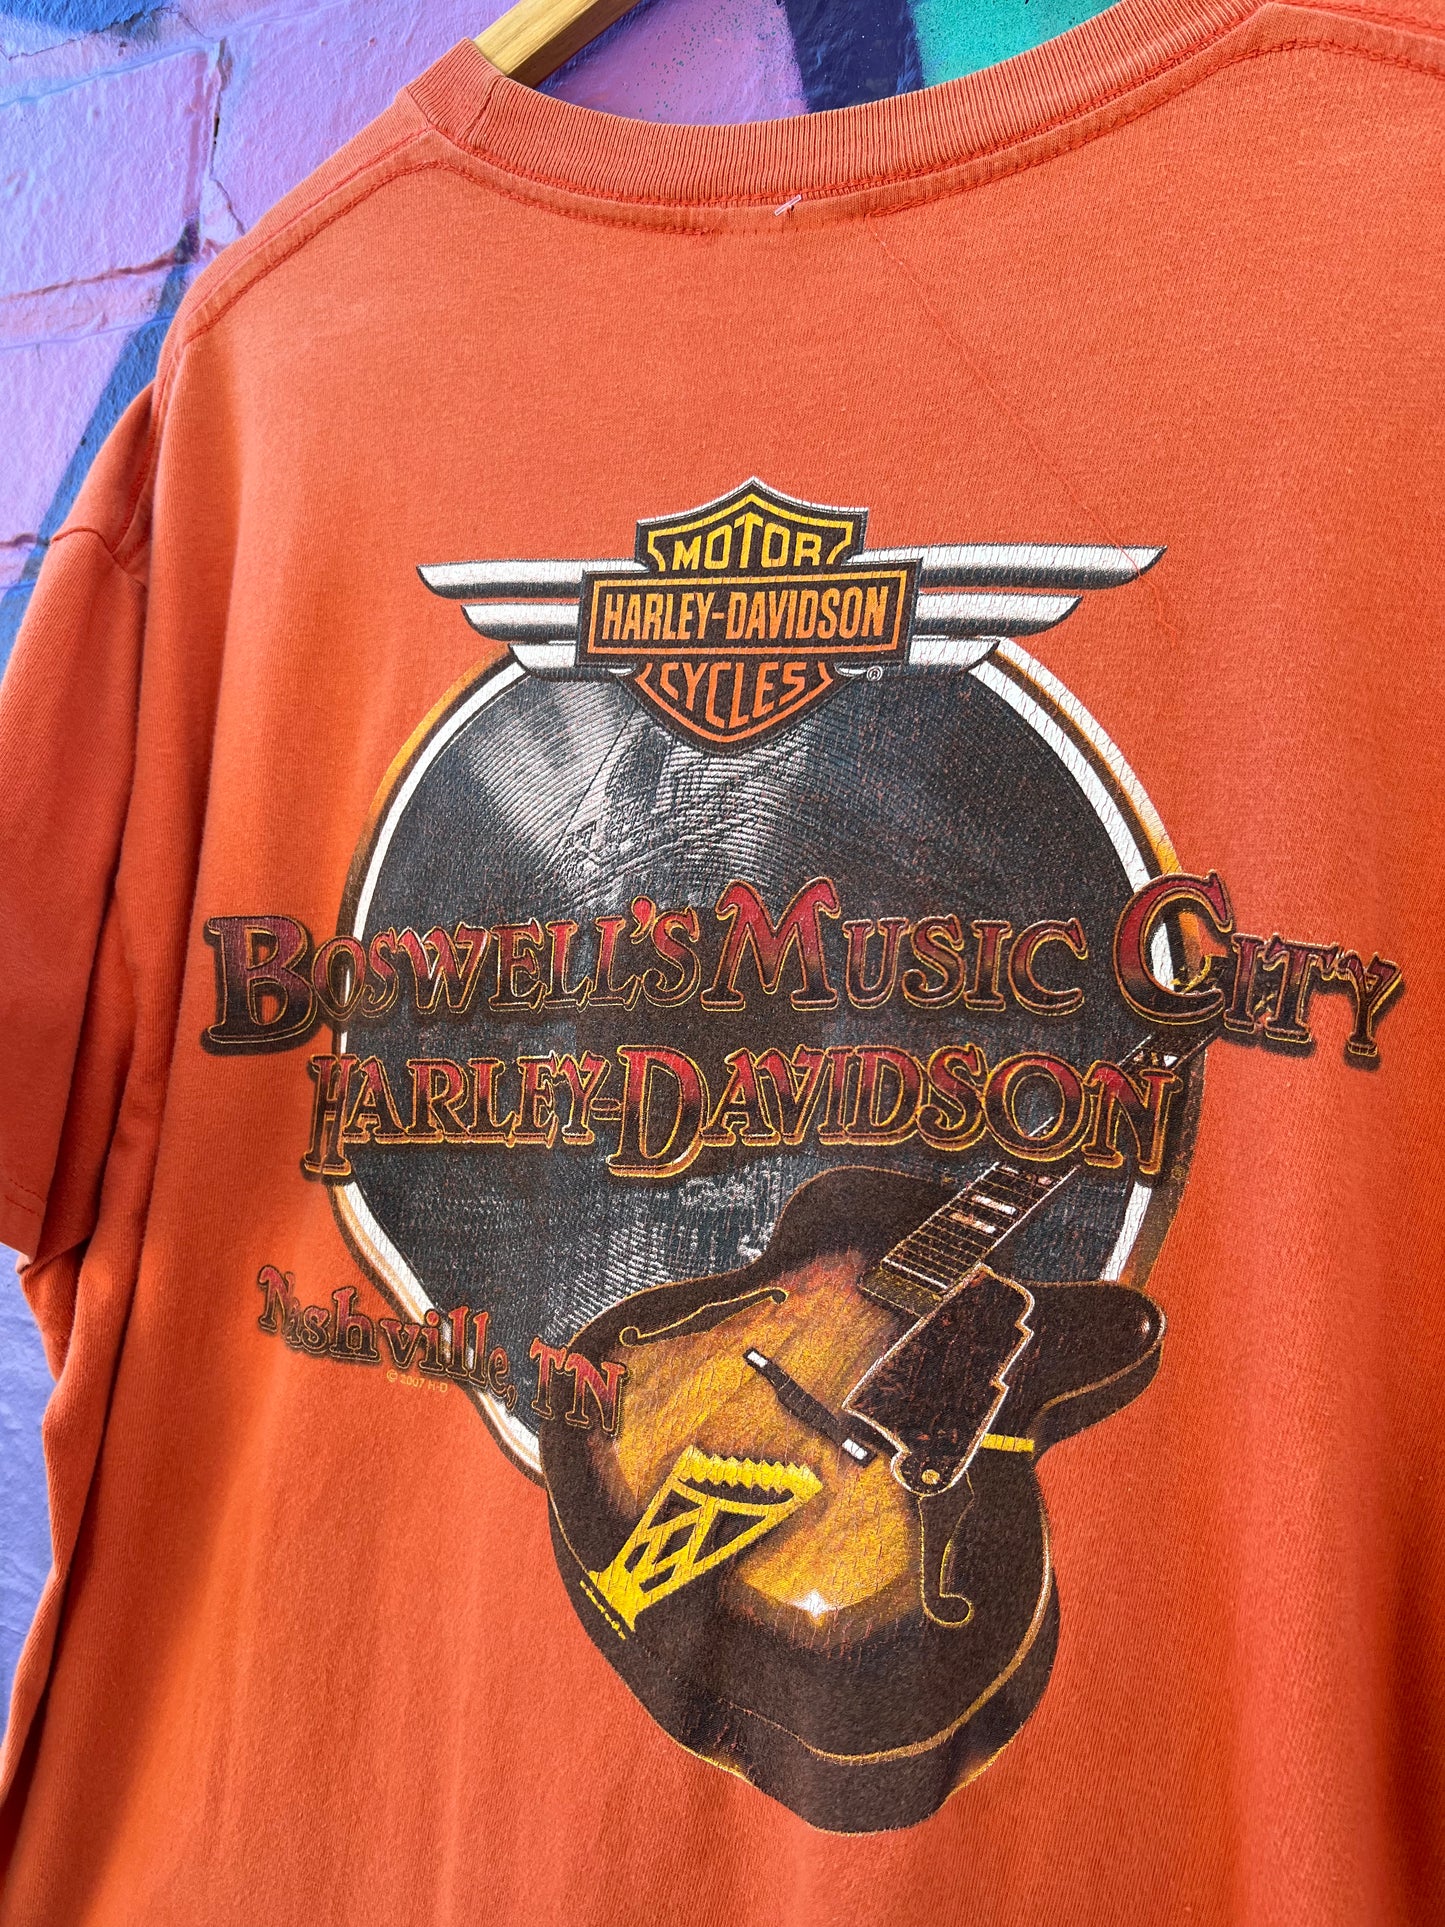 L - HD Bad To The Chrome Orange Boswells Music City DS